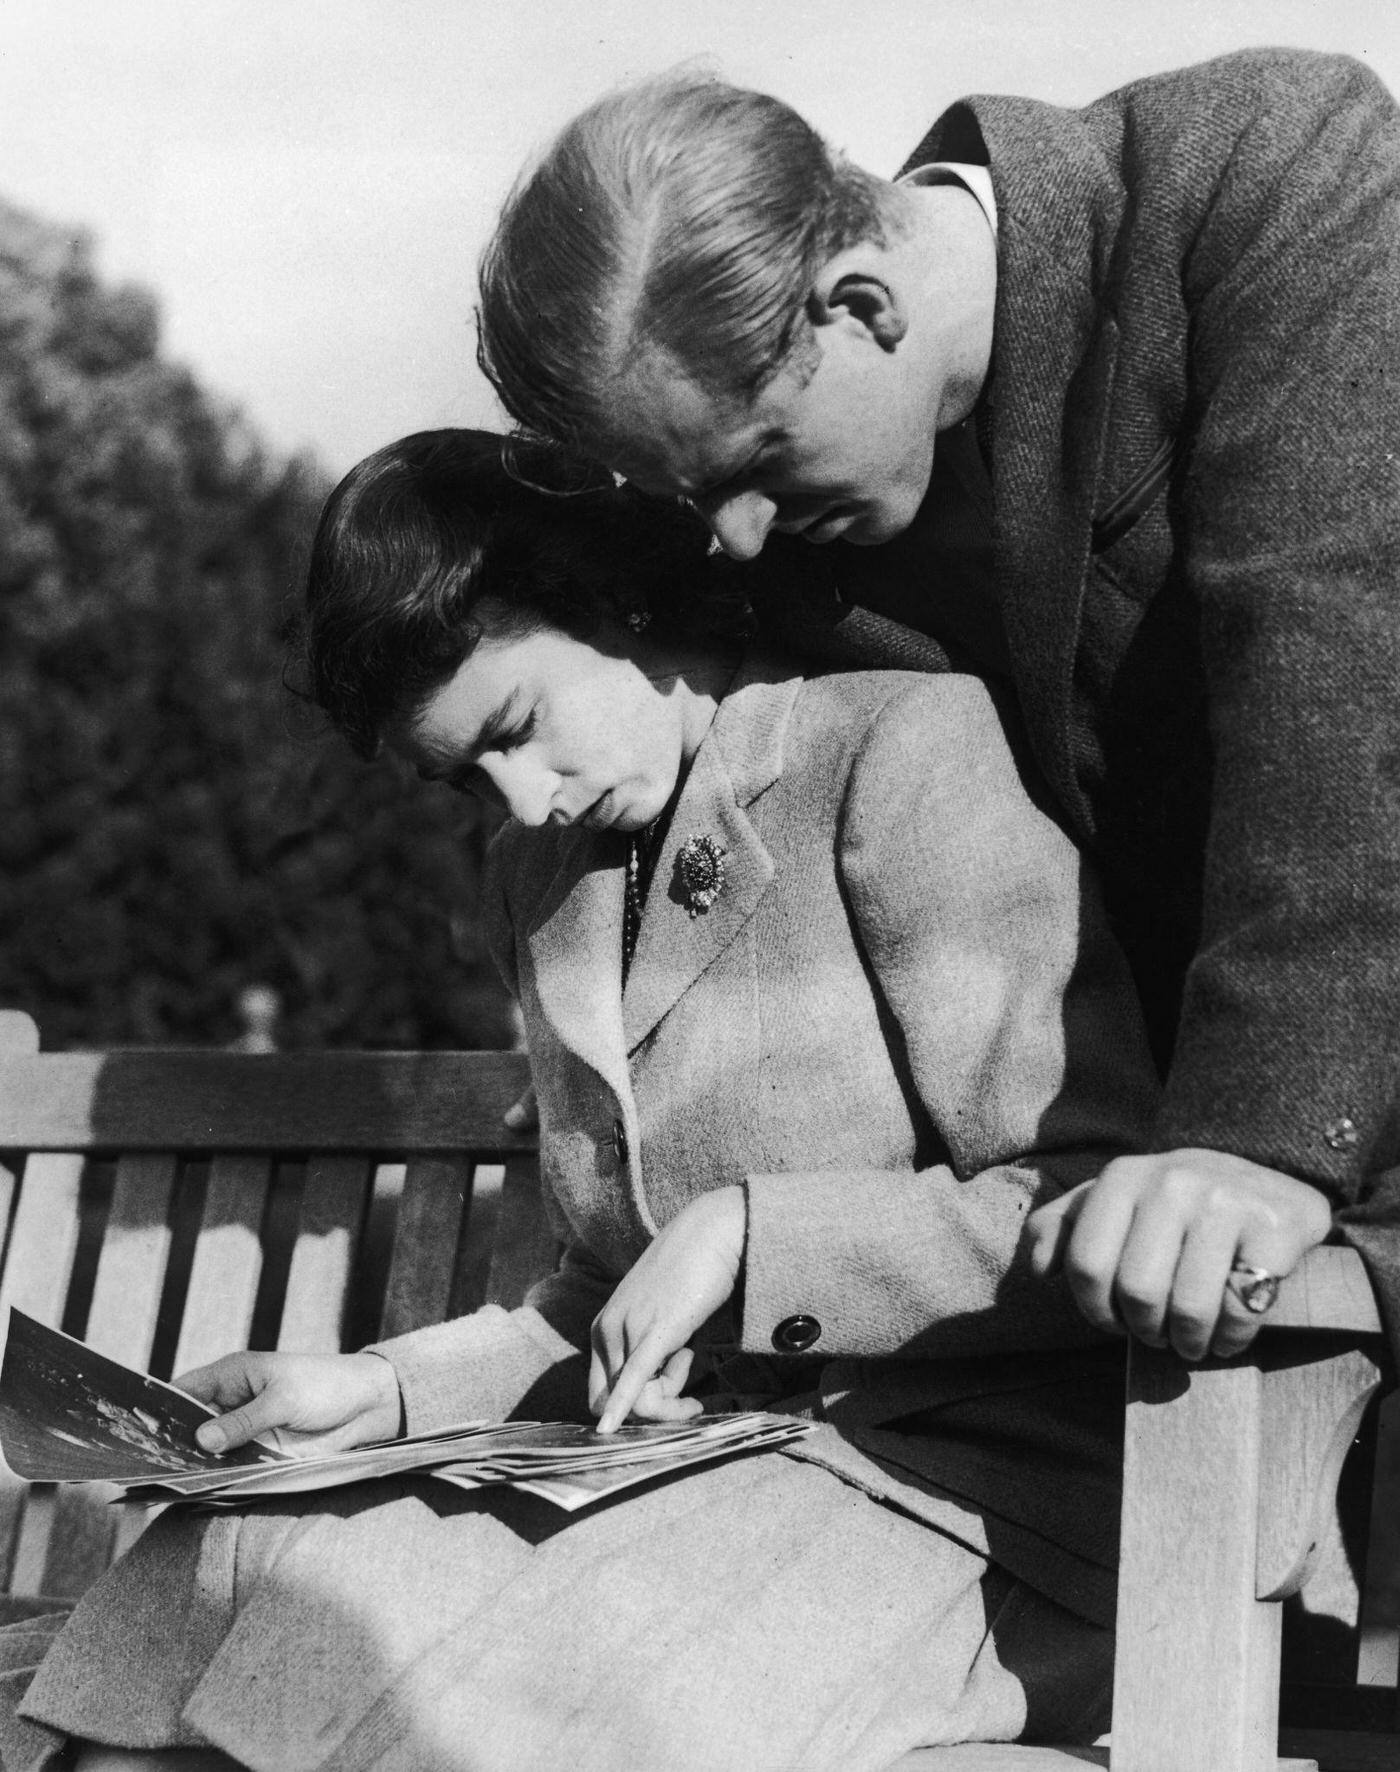 Princess Elizabeth and Philip Mountbatten studying their wedding photographs while on honeymoon in Romsey, Hampshire, November 1947.